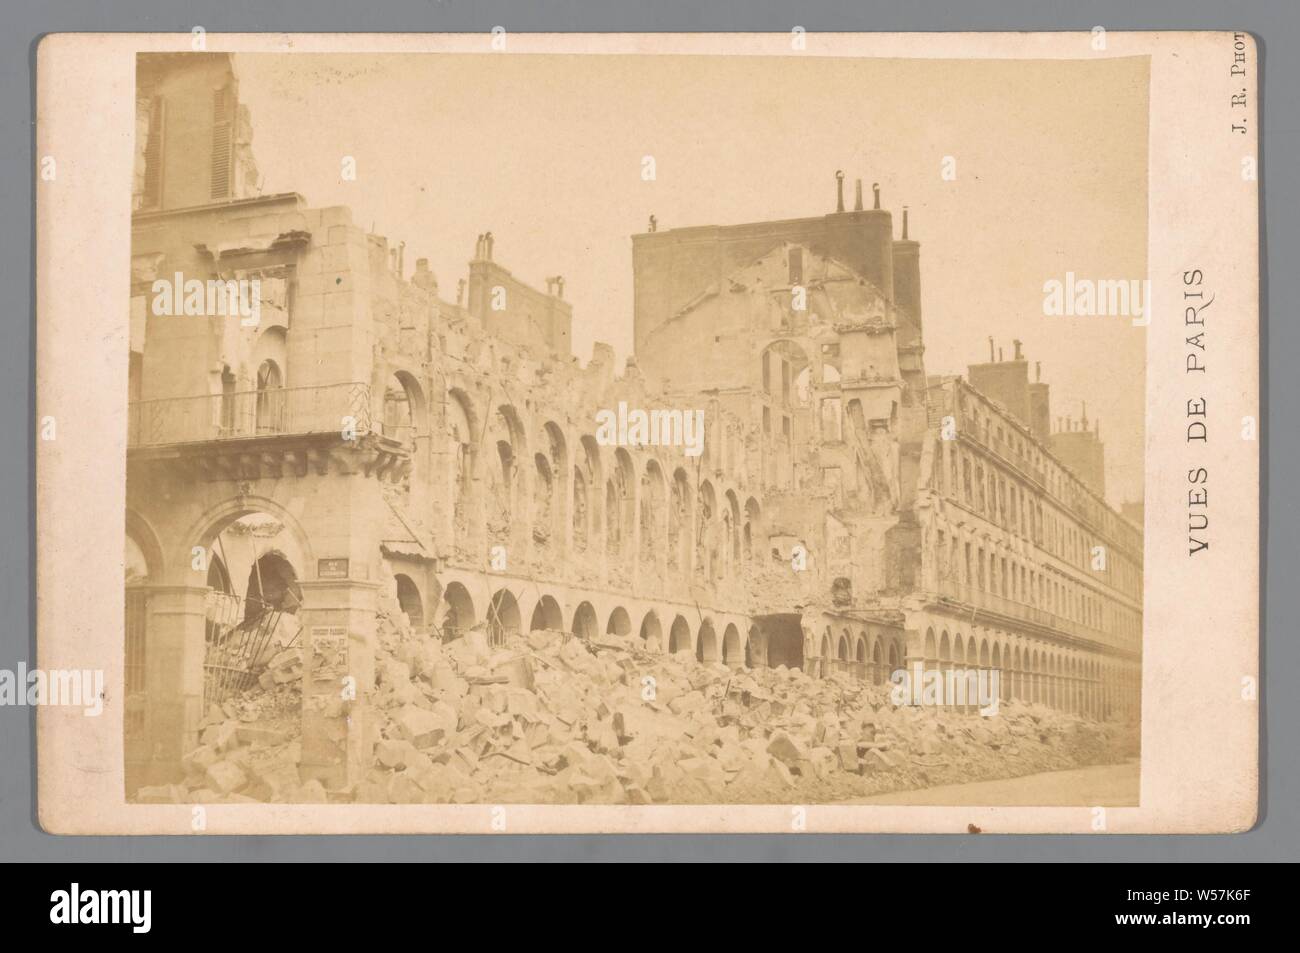 View of the Ministry of Finance in Paris after the fire by the Paris Commune Vues de Paris (series title on object), national government, organization of trade and finance, ruins of a building, architecture, Paris, JR (mentioned on object), 28-May-1871 - in or before 1872, cardboard, photographic paper, albumen print, h 108 mm × w 165 mm Stock Photo